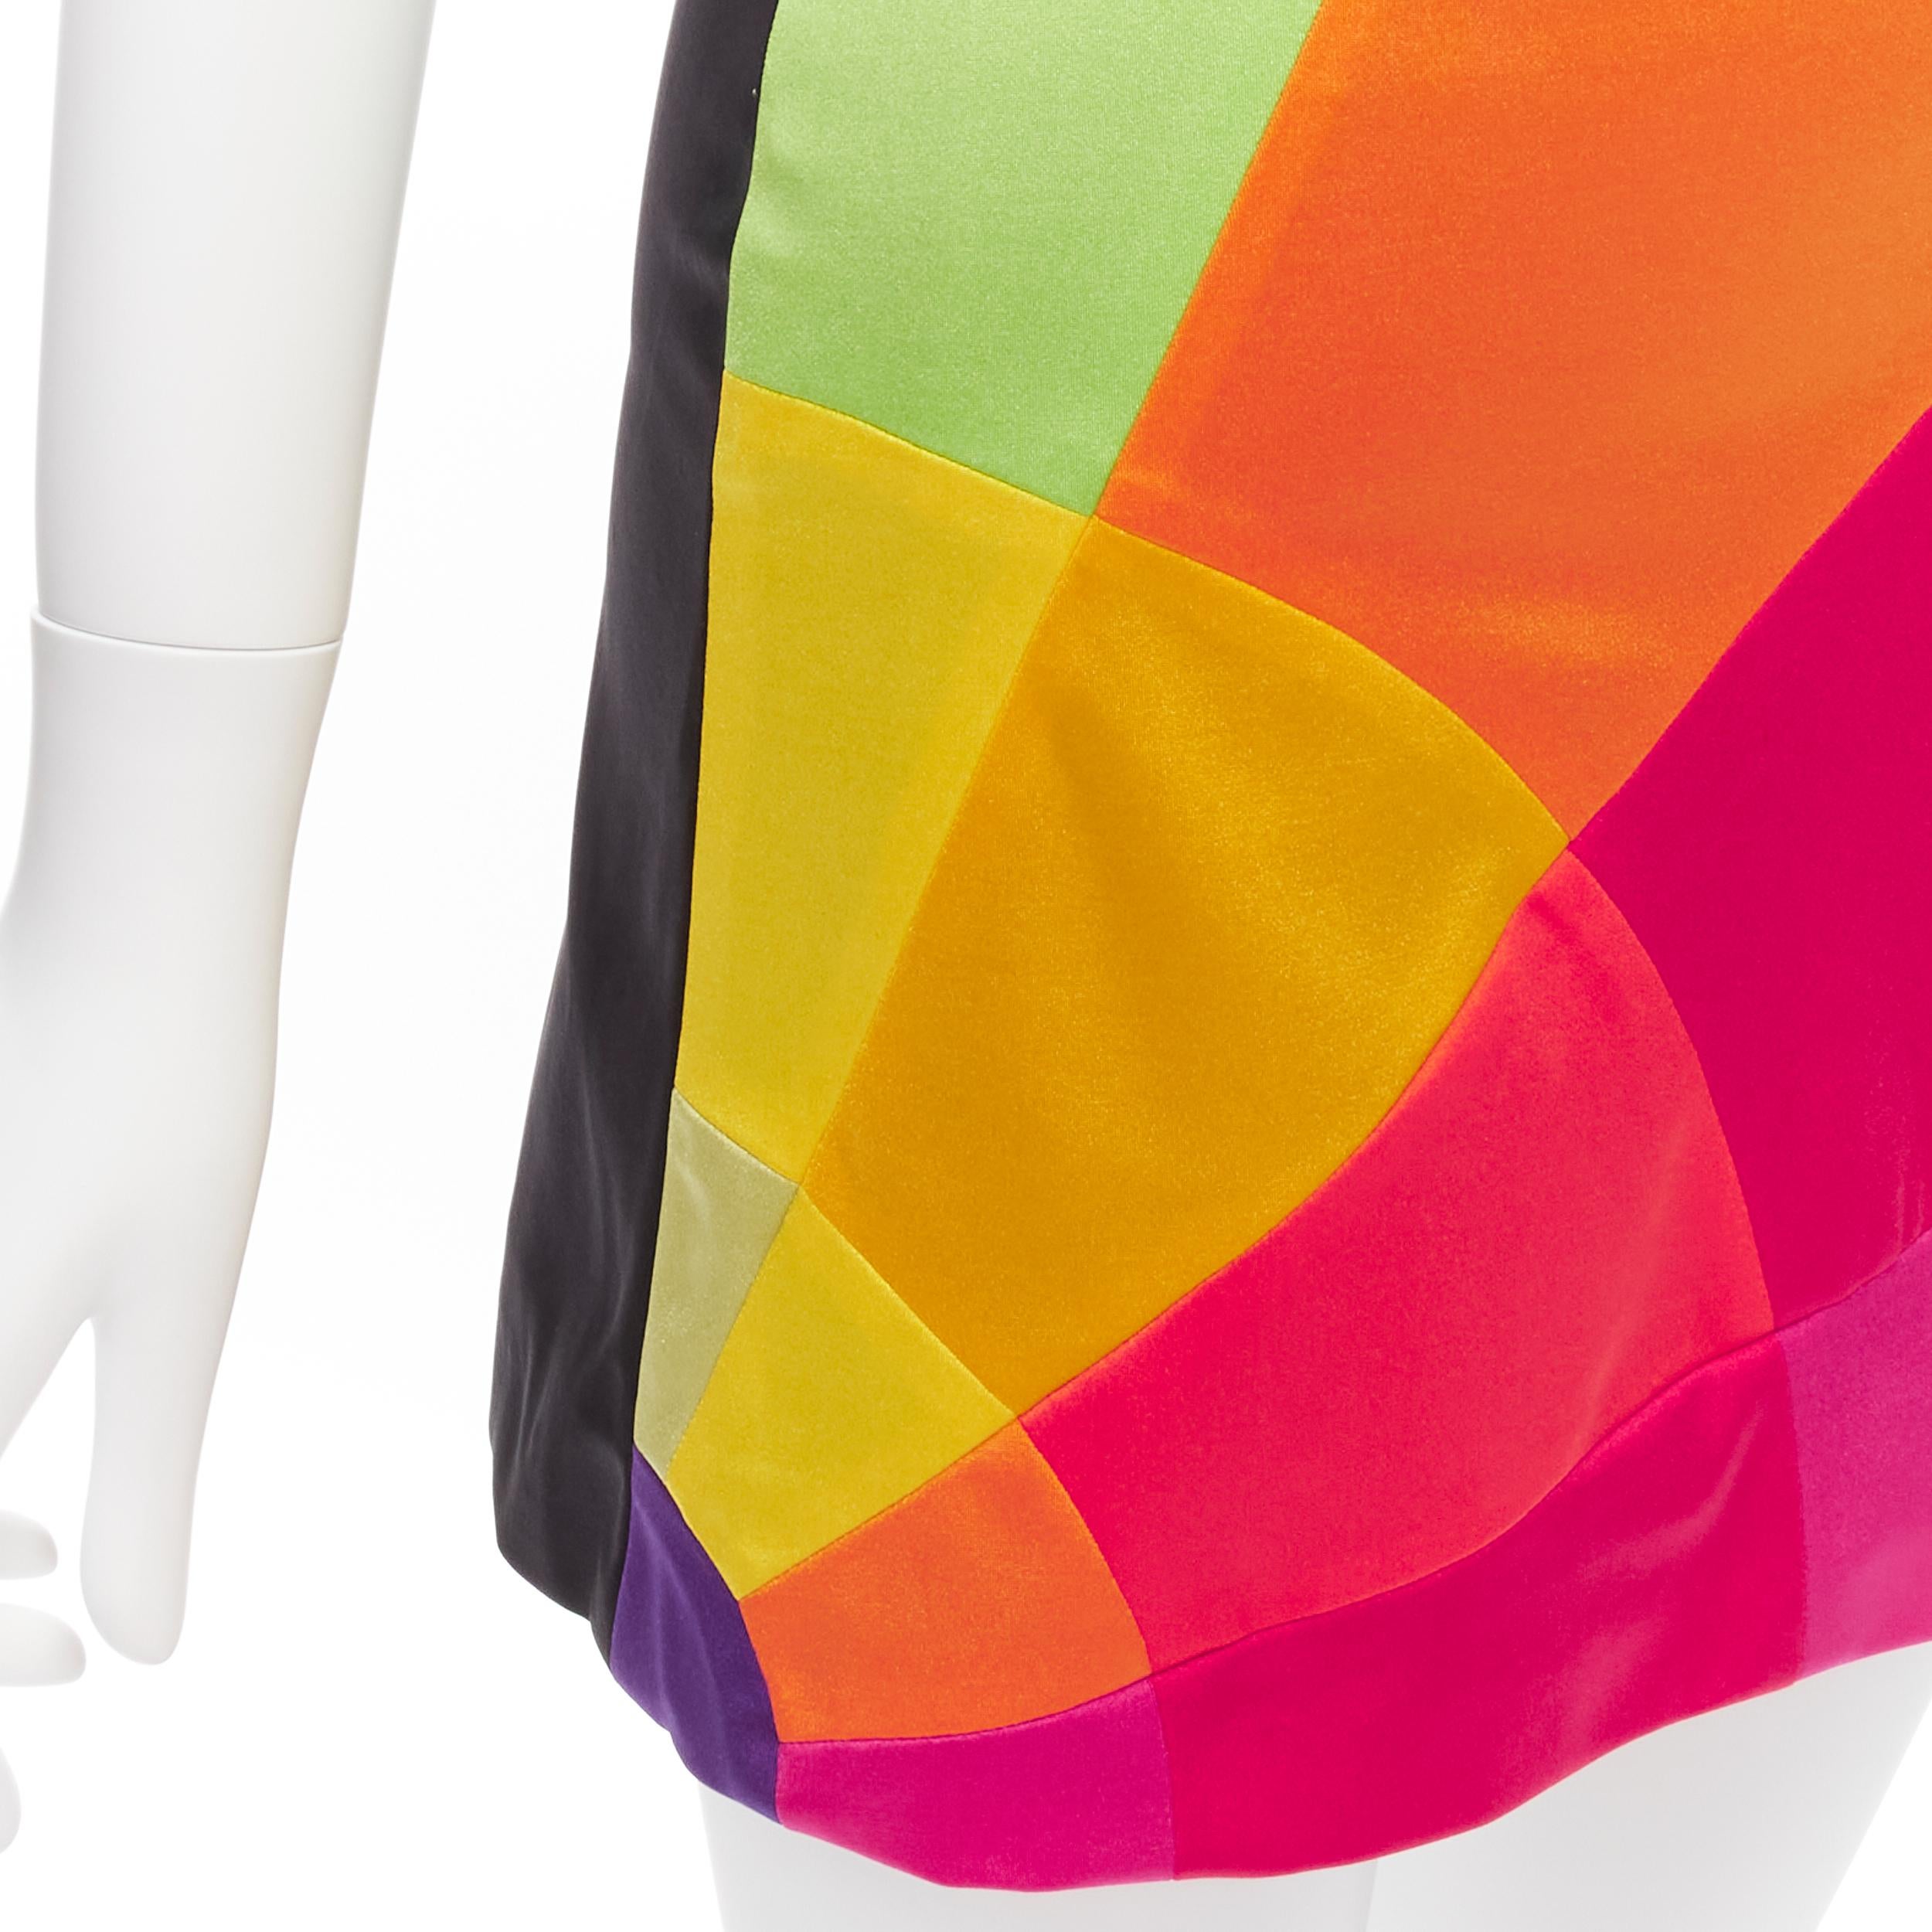 MOSCHINO CHEAP CHIC Vintage rainbow colorblock patchwork mini skirt IT40 S
Reference: TGAS/D00120
Brand: Moschino
Collection: Cheap and Chic
Material: Polyamide, Elastane
Color: Multicolour
Pattern: Solid
Closure: Zip
Lining: Black Mesh
Extra